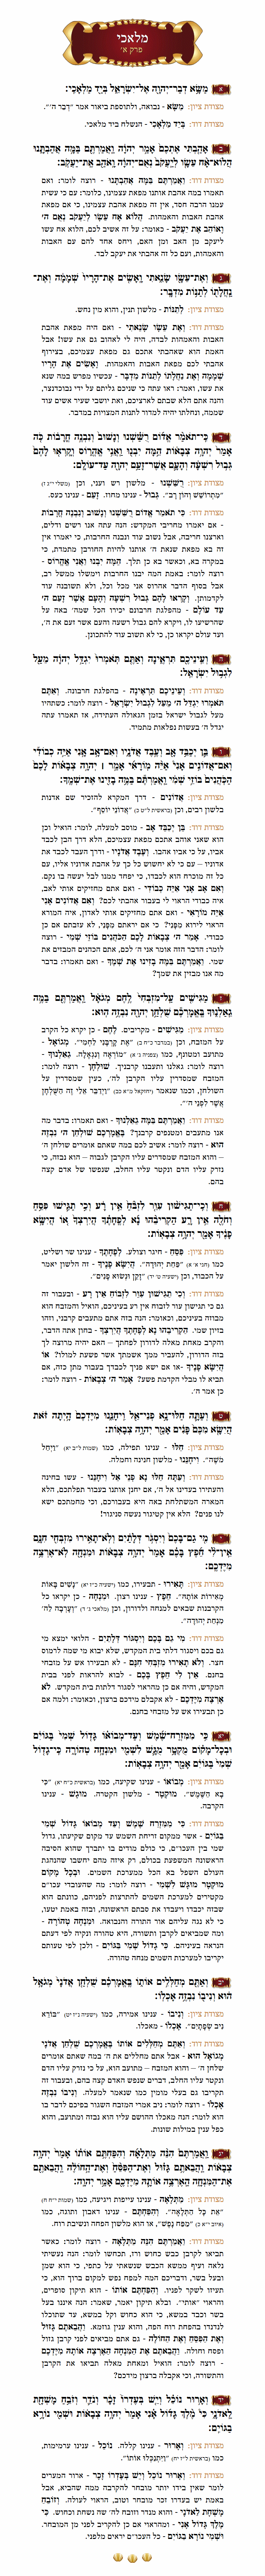 Sefer Malachi Chapter 1 with commentary